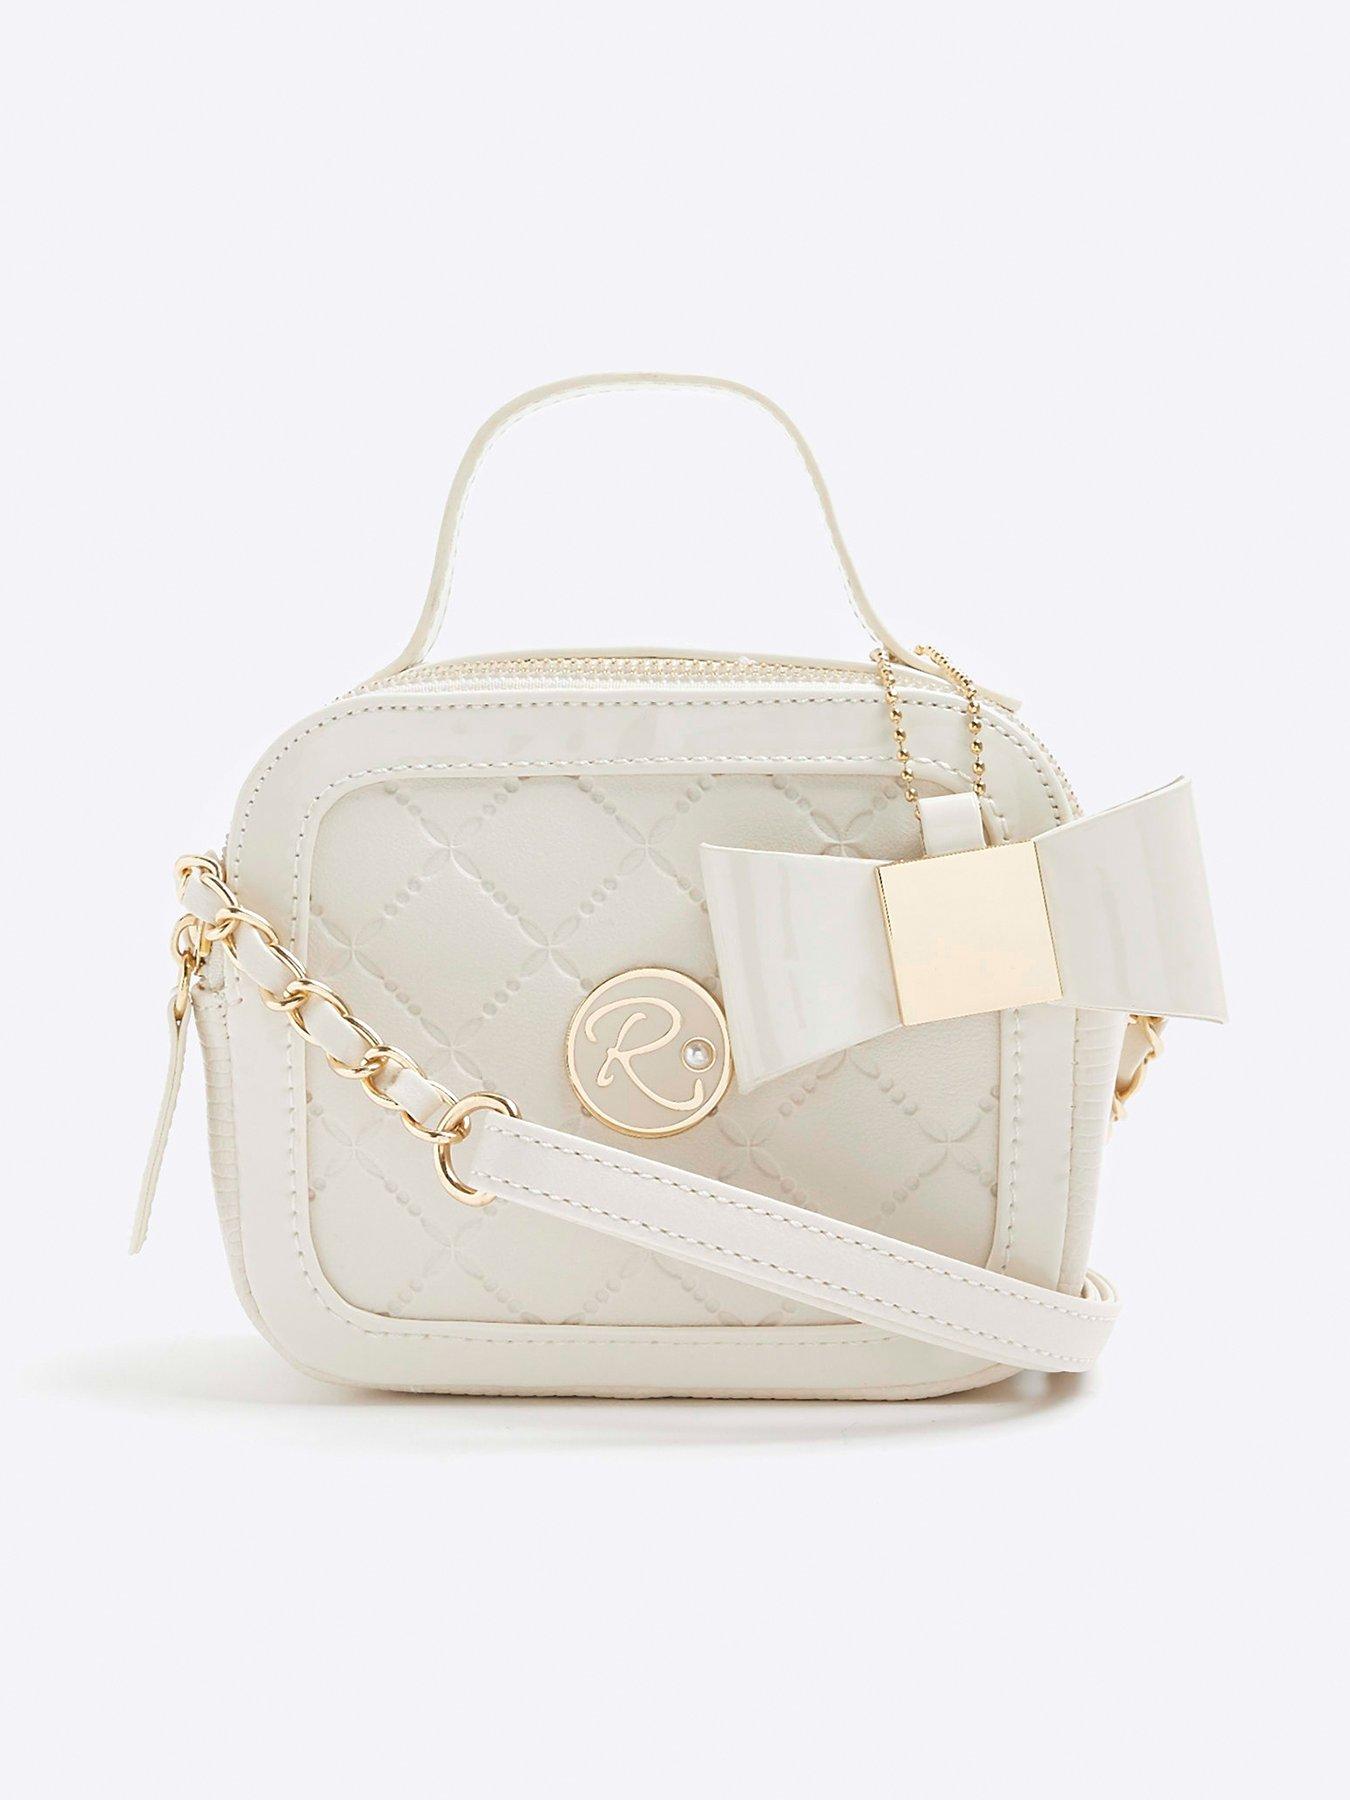 River Island quilted cross body bag with chain strap in white